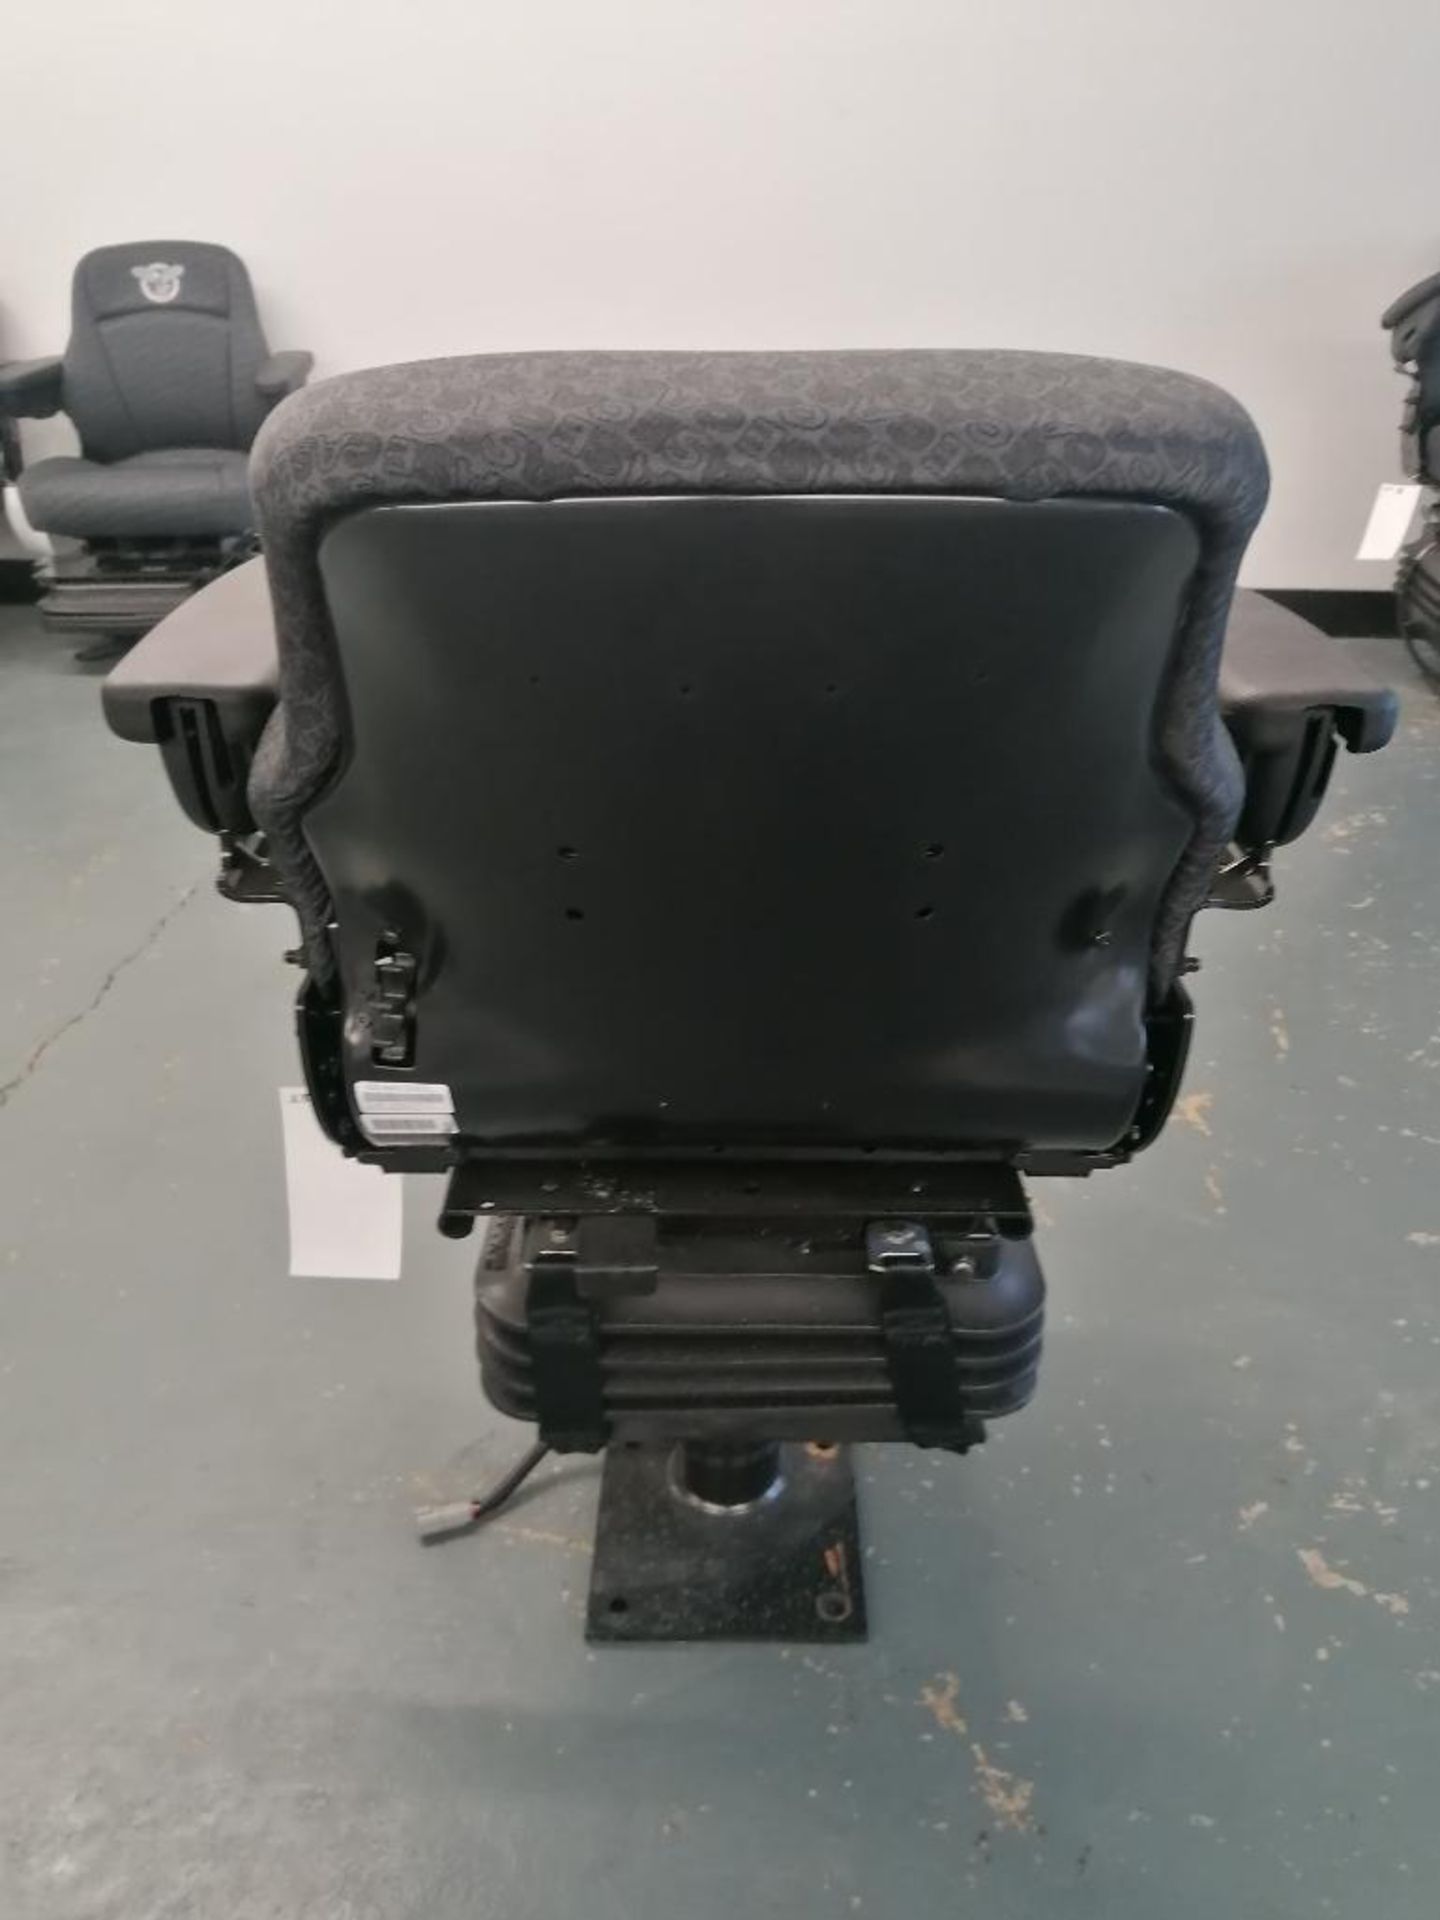 CNH Air Suspension Seat for Case Backhoe, Serial #007091742368. Located in Mt. Pleasant, IA. - Image 5 of 14